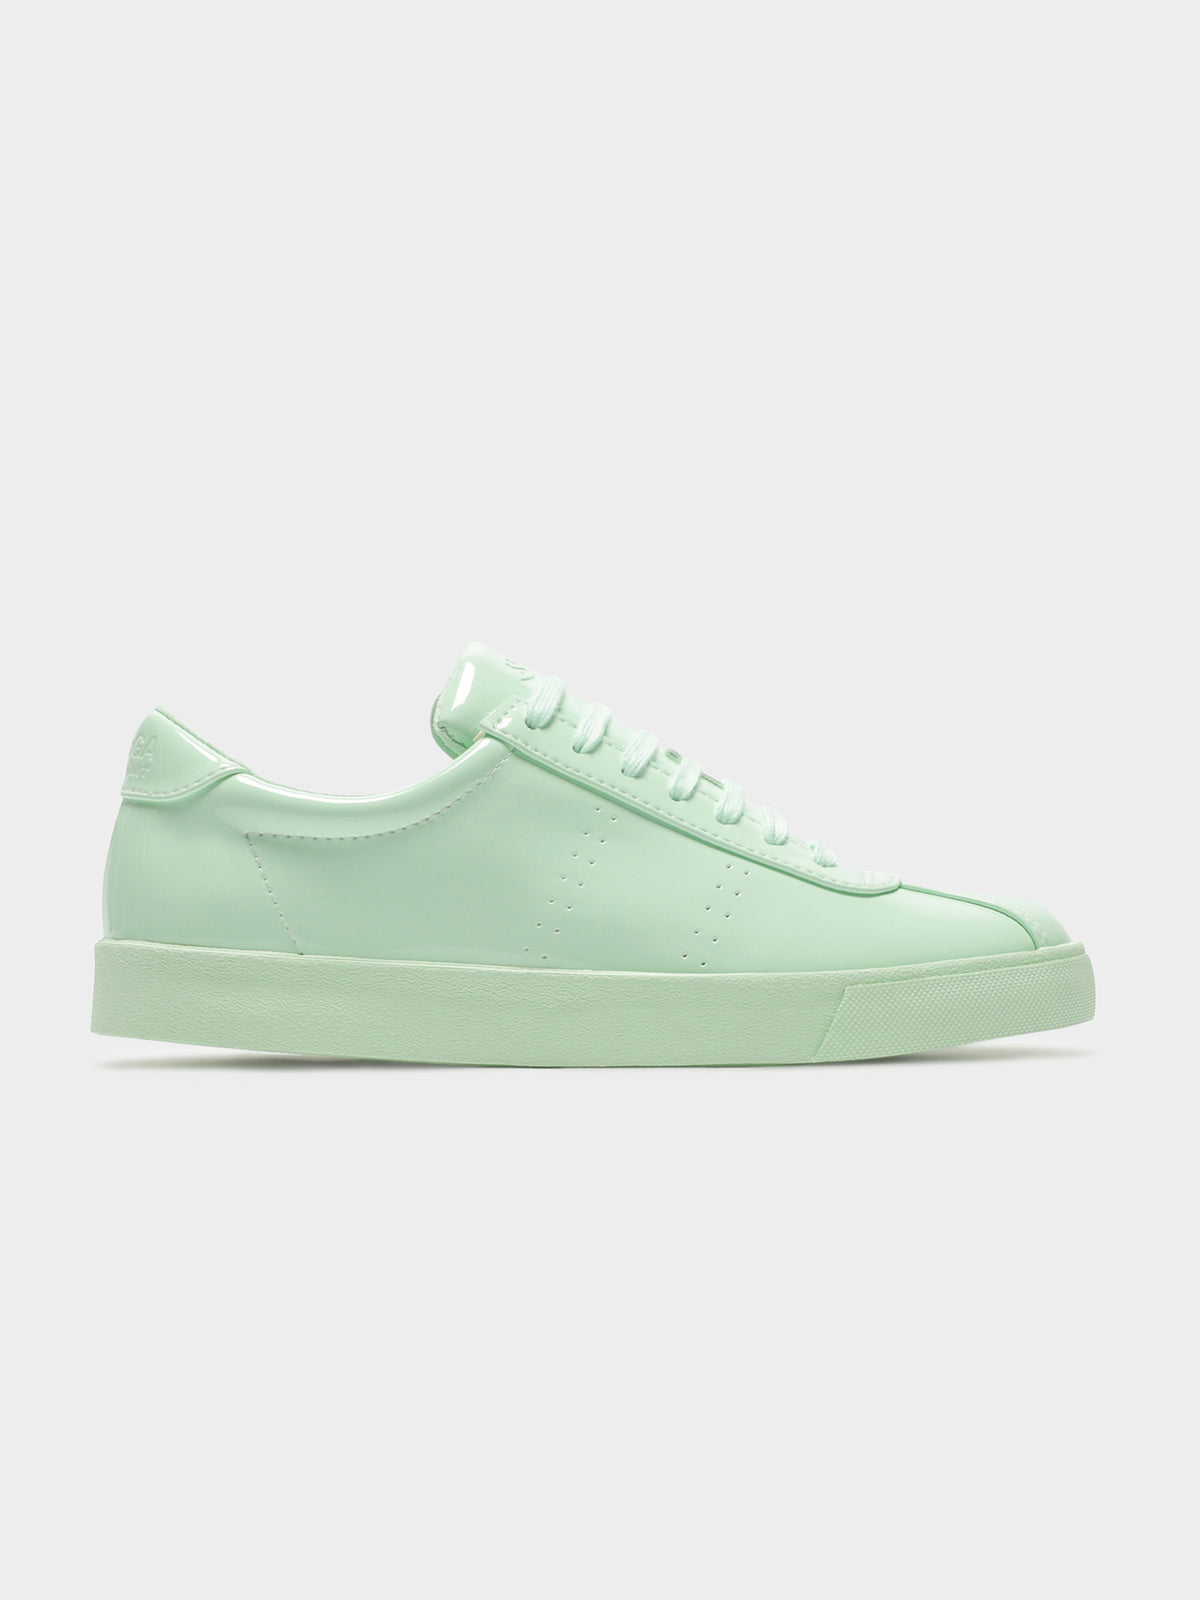 Womens 2843 Clubs Syneaw Pastel Sneakers in Mint Green